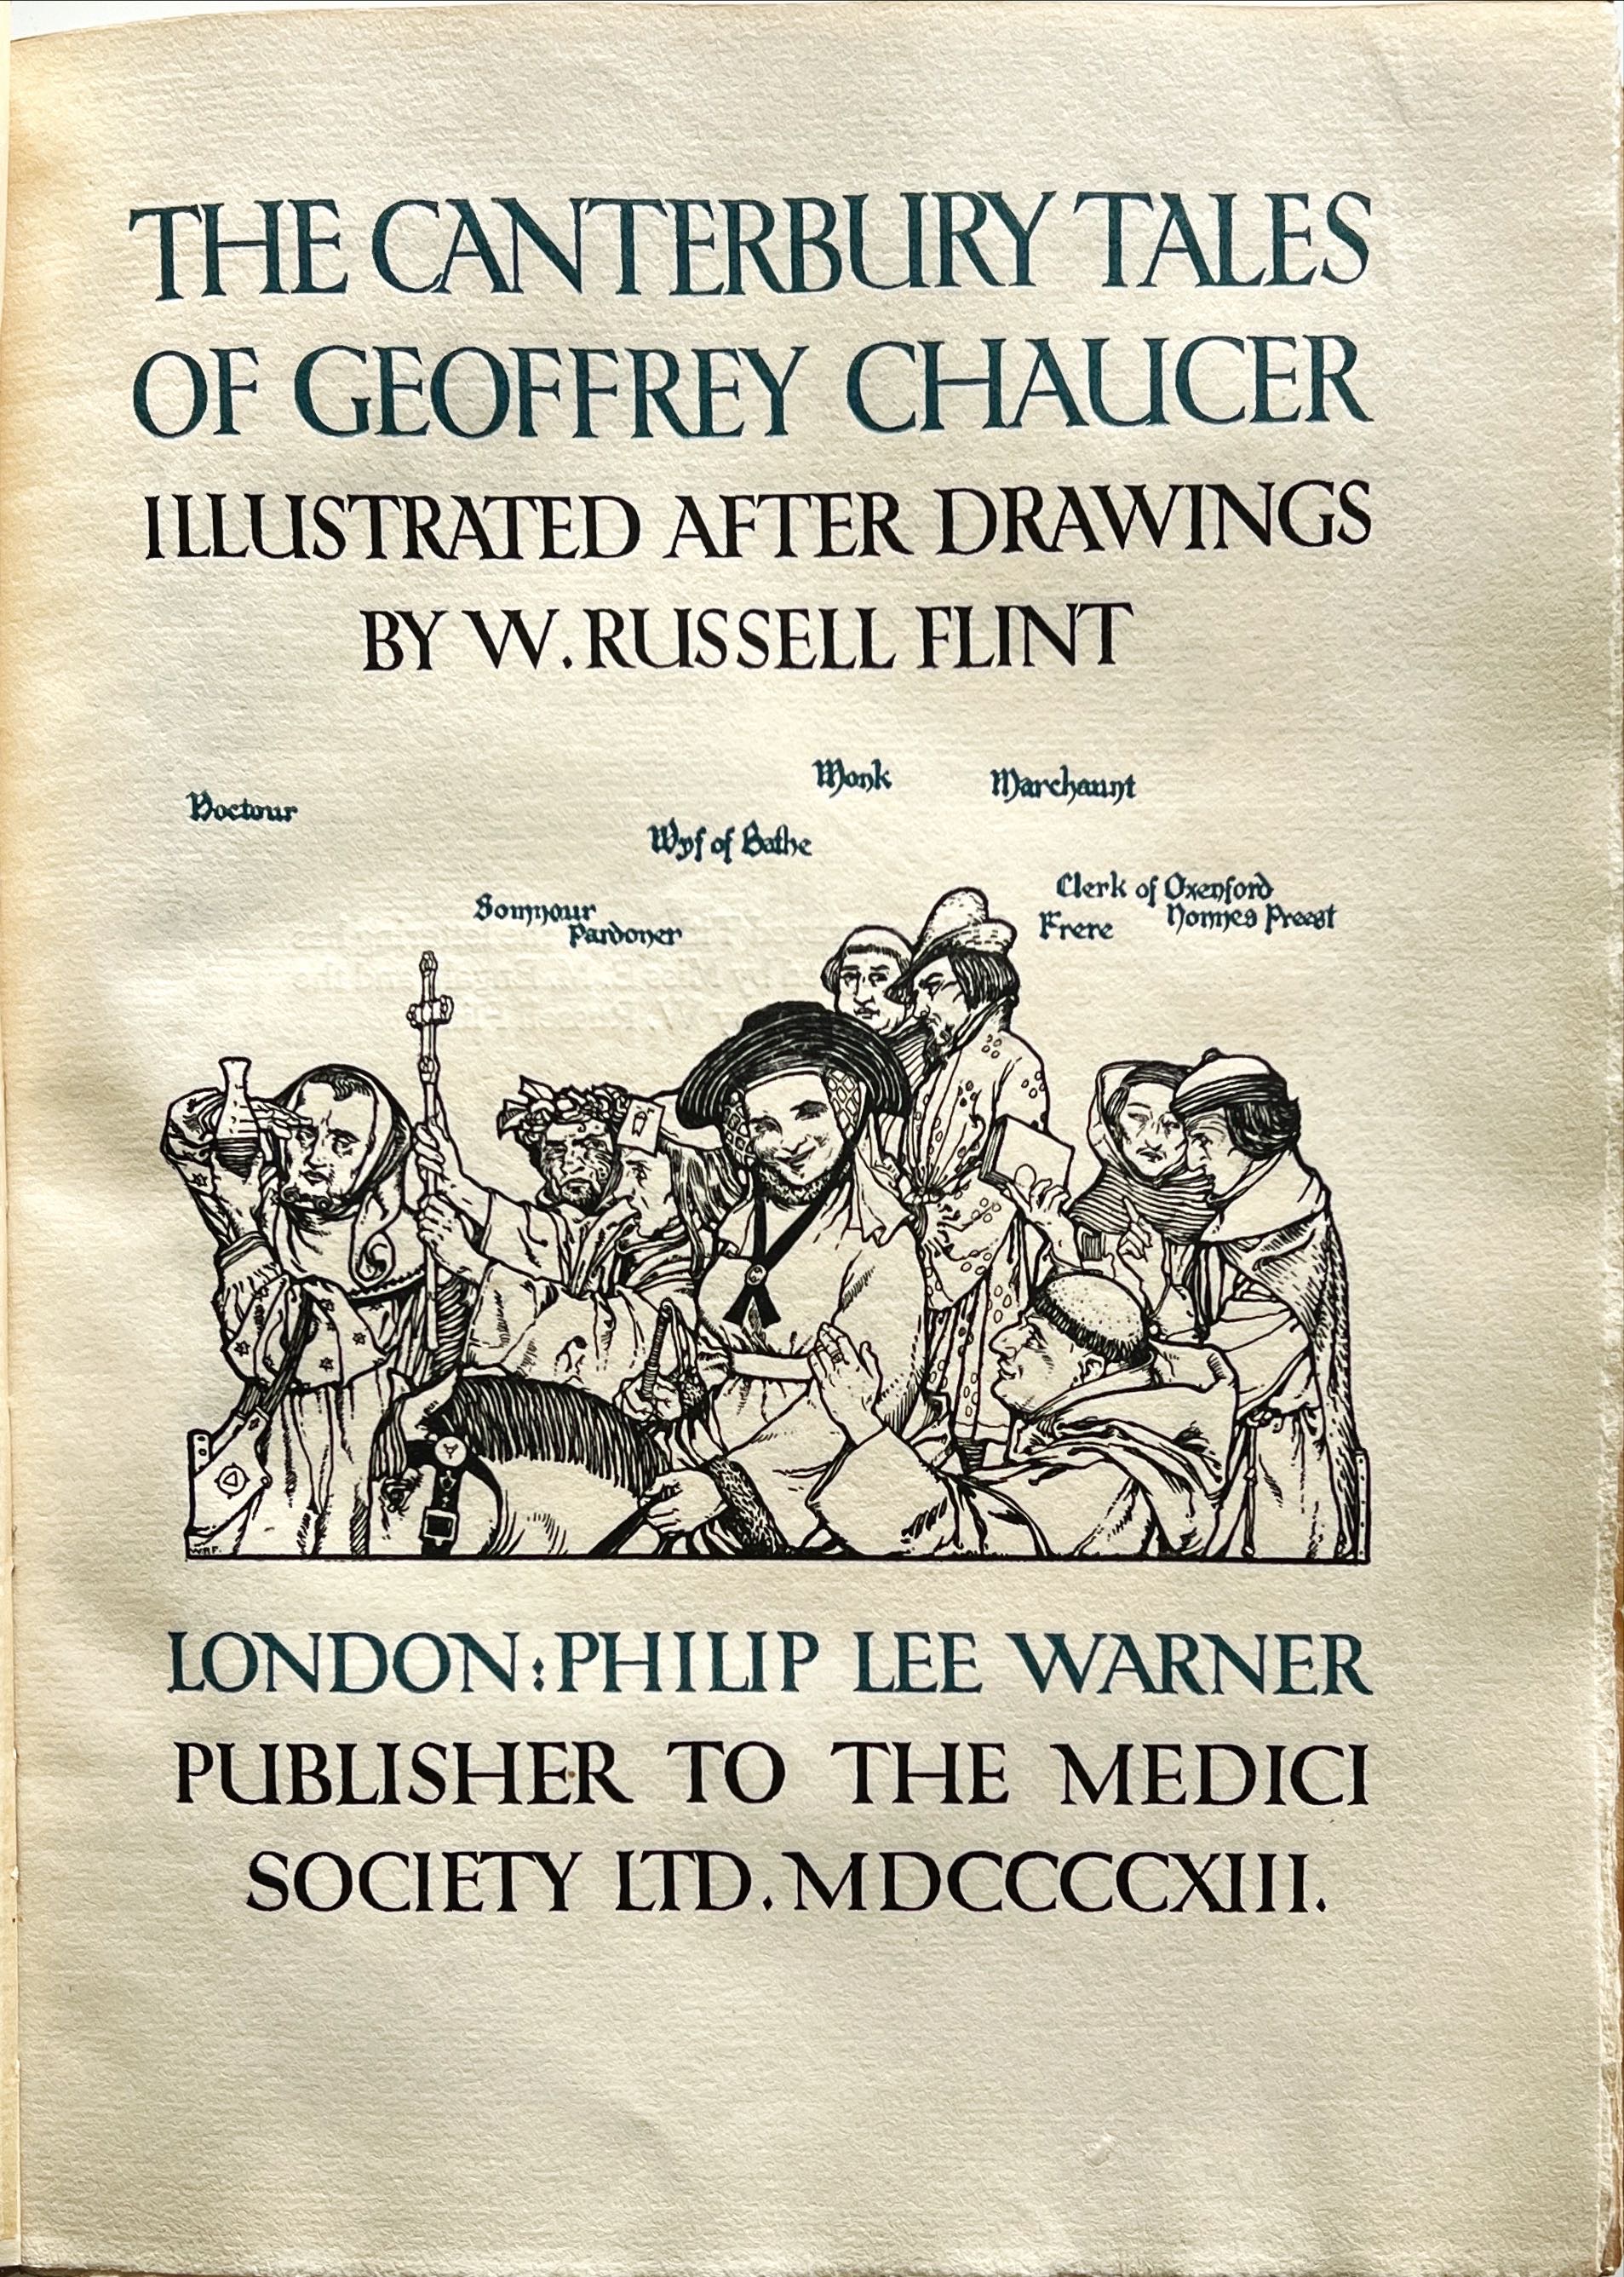 The Canterbury Tales, by Chaucer Geoffrey